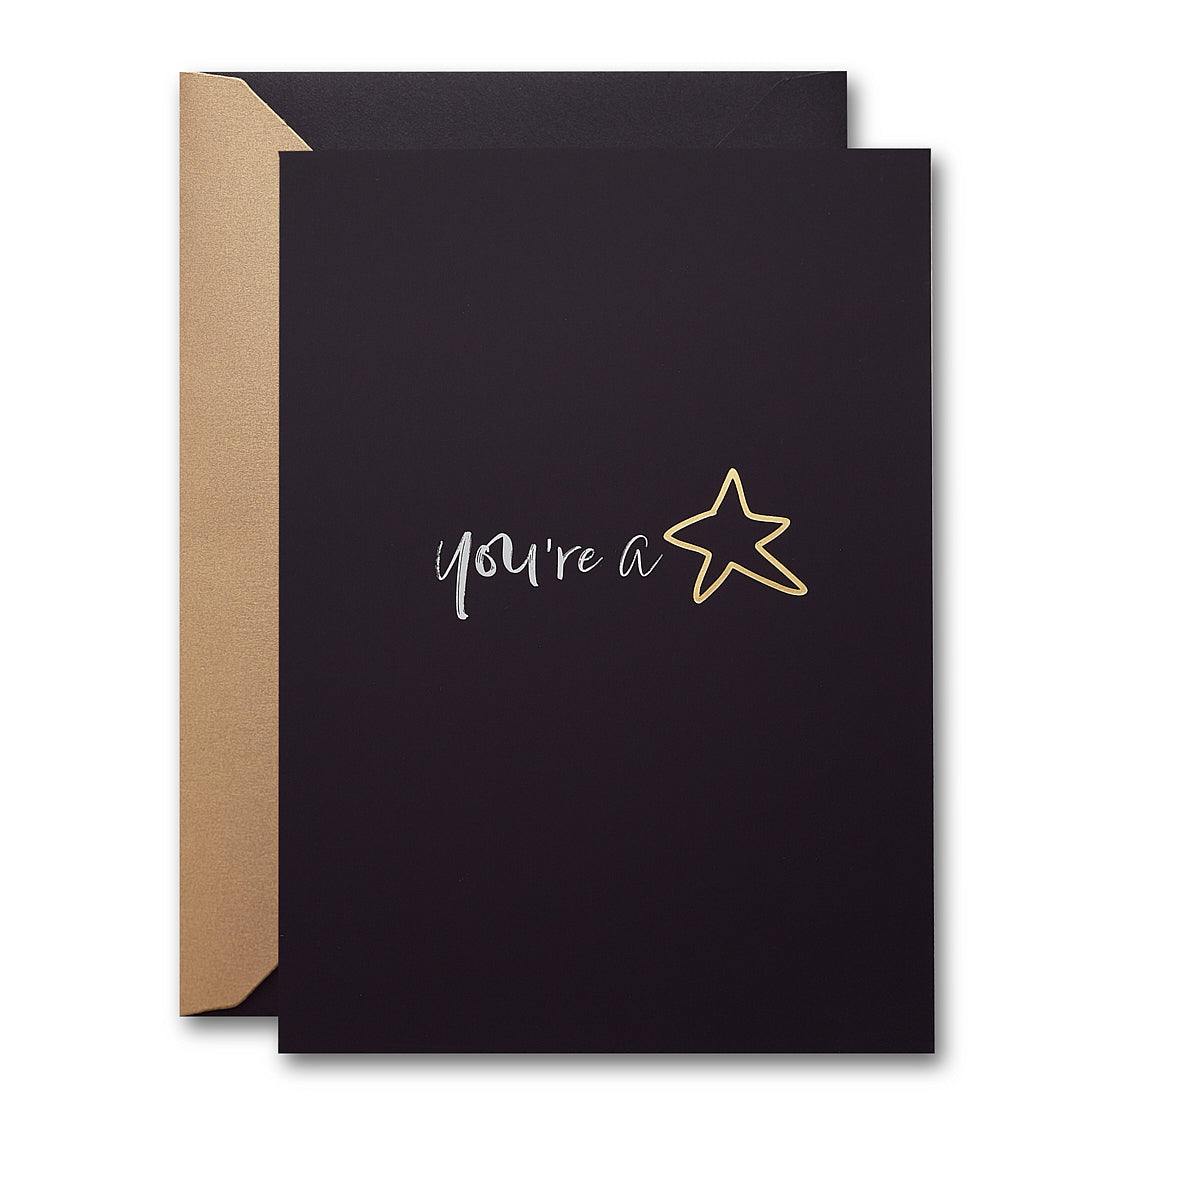 'You're a Star' Card - MoMuse Jewellery